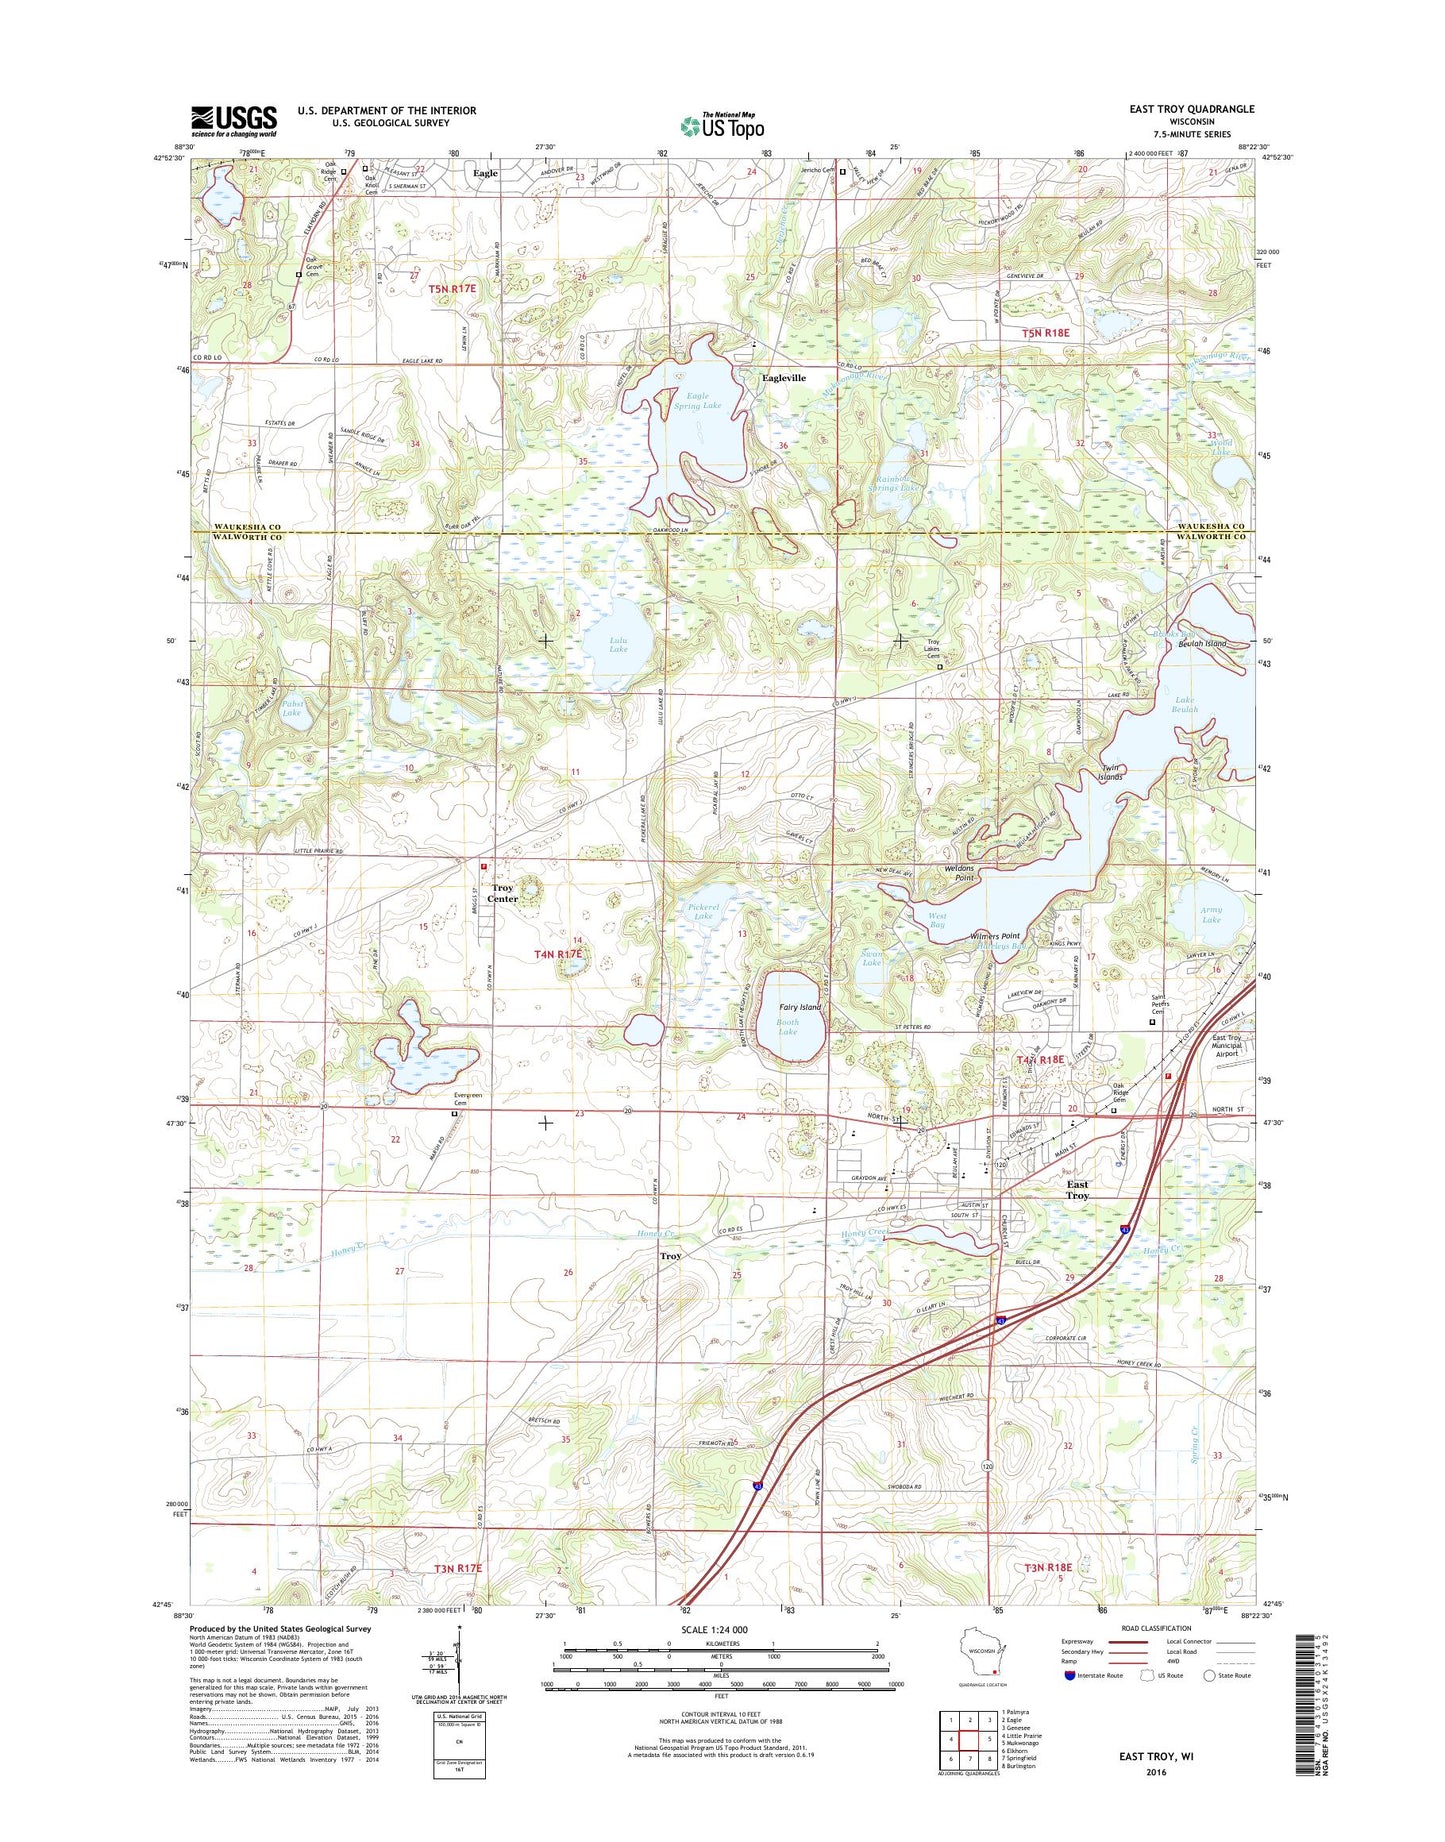 East Troy Wisconsin US Topo Map Image